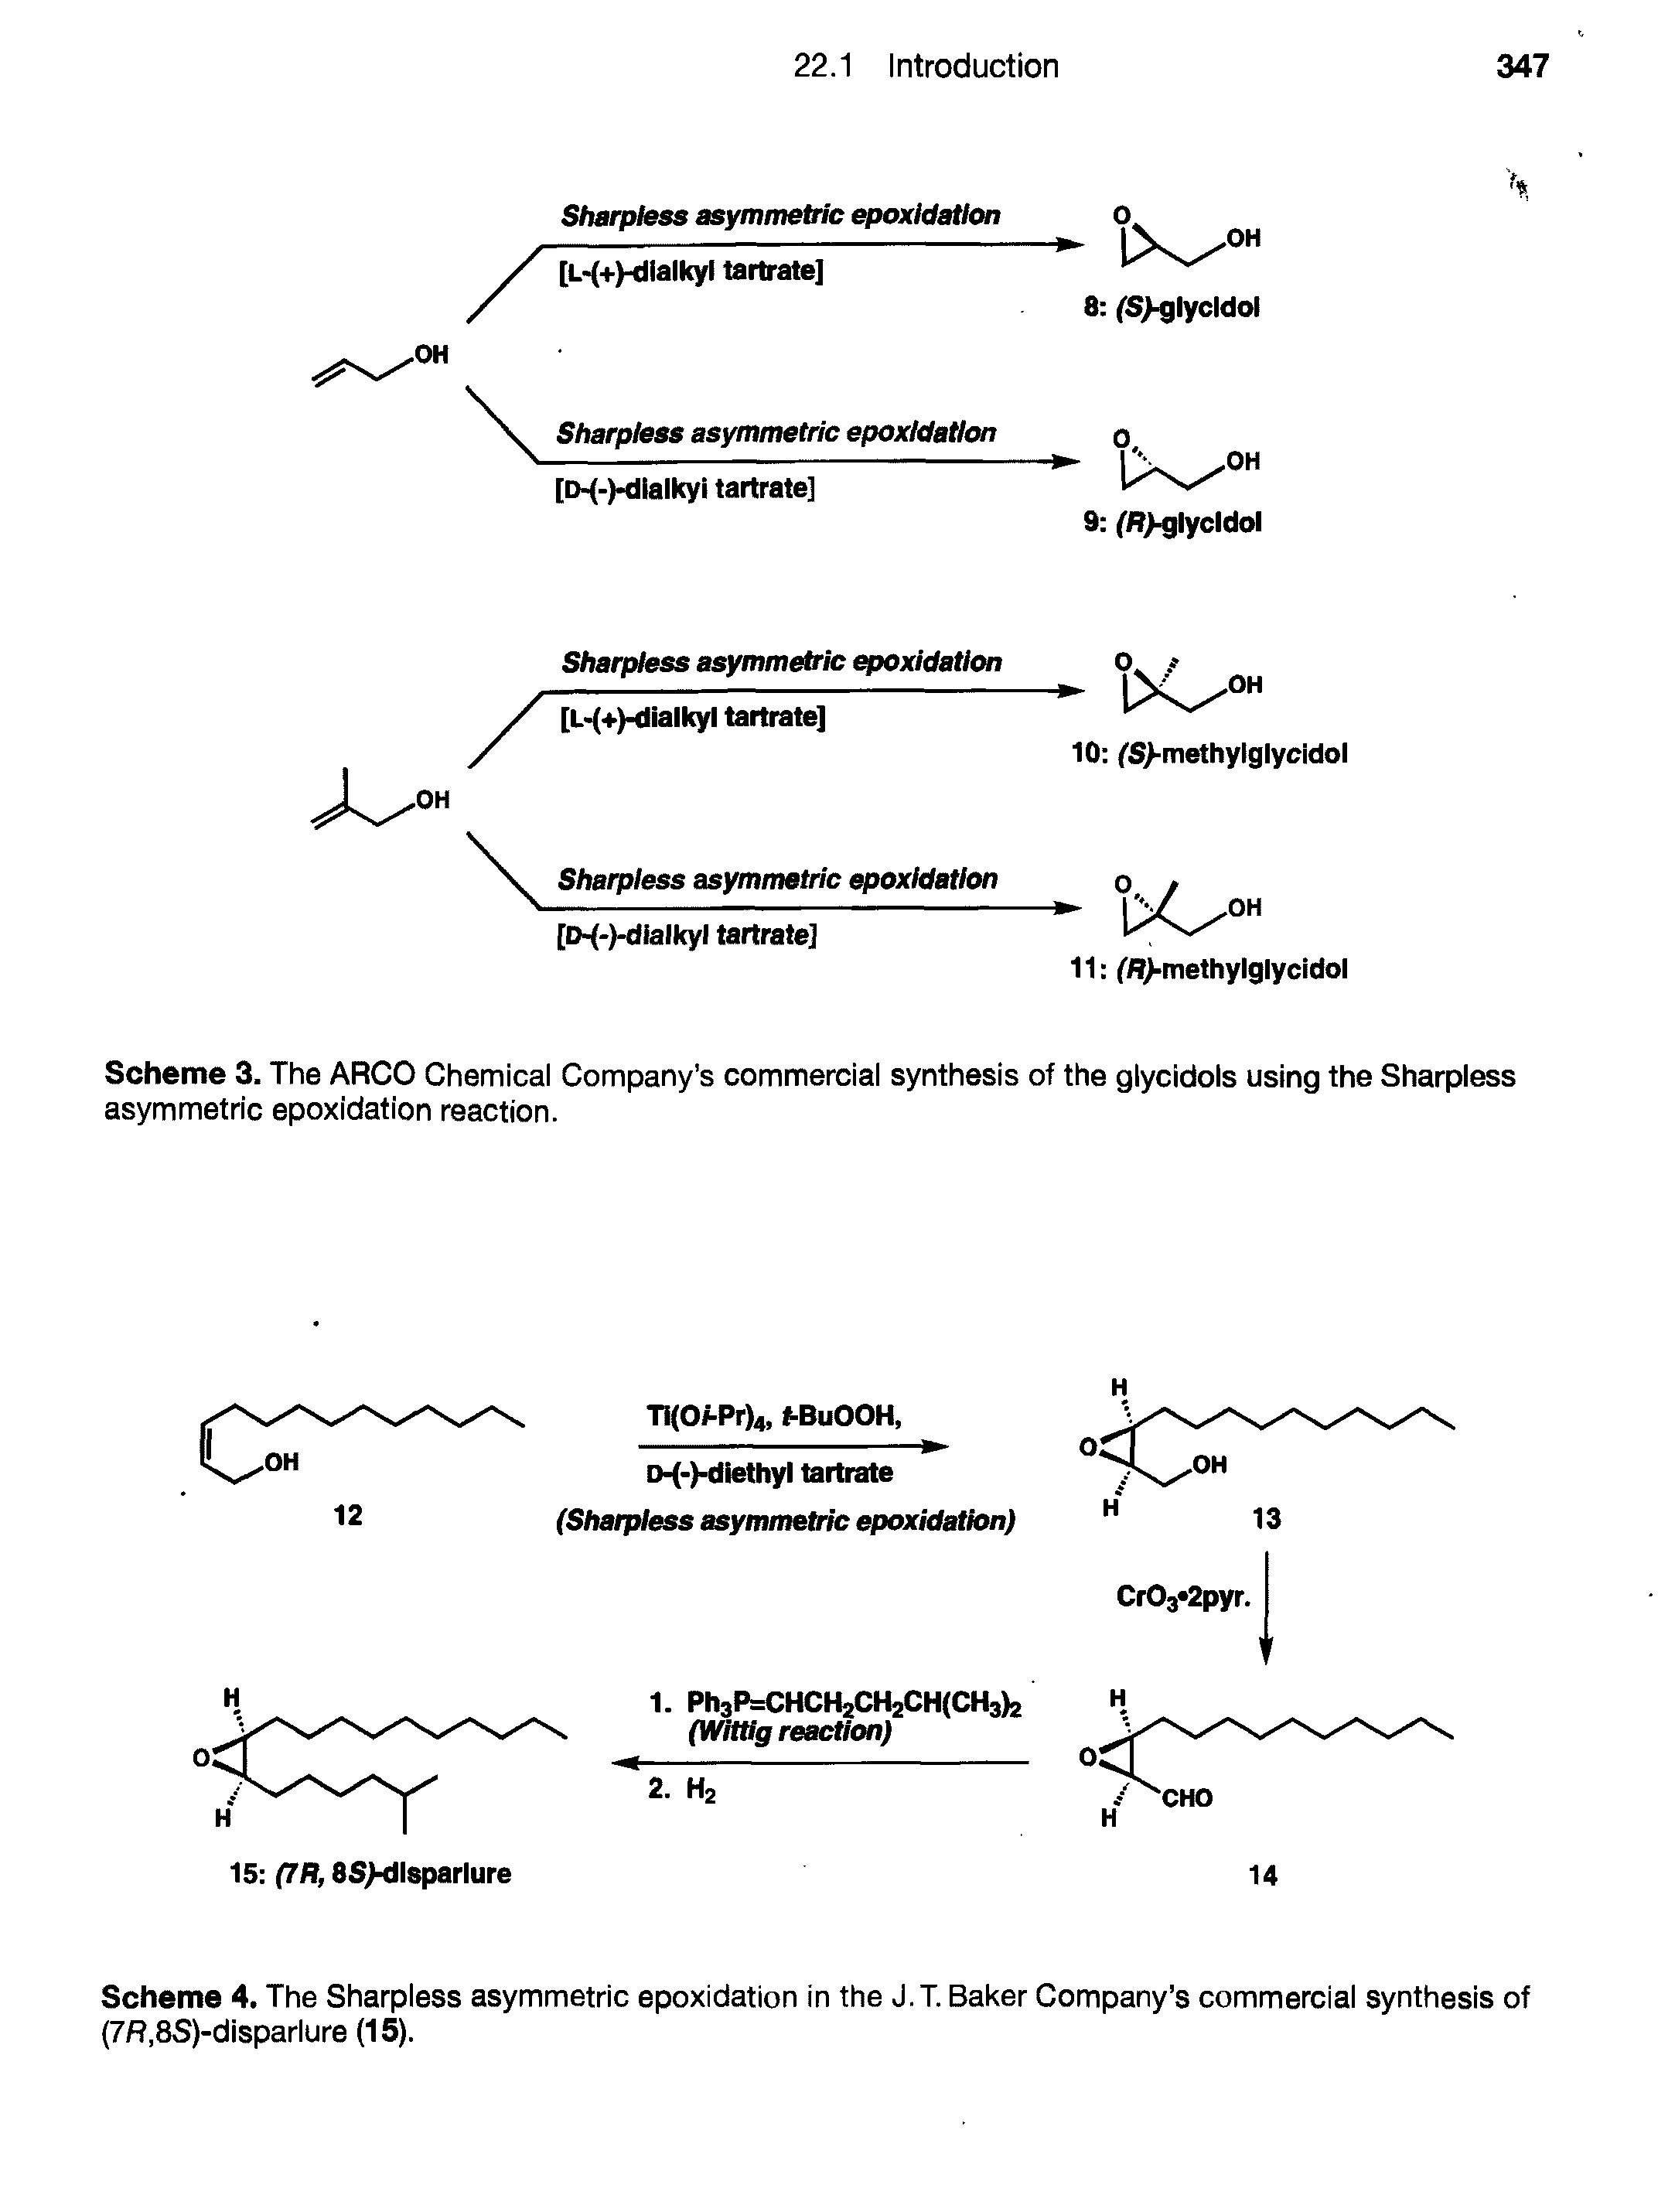 Scheme 3. The ARCO Chemical Company s commercial synthesis of the glycidols using the Sharpless asymmetric epoxidatlon reaction.